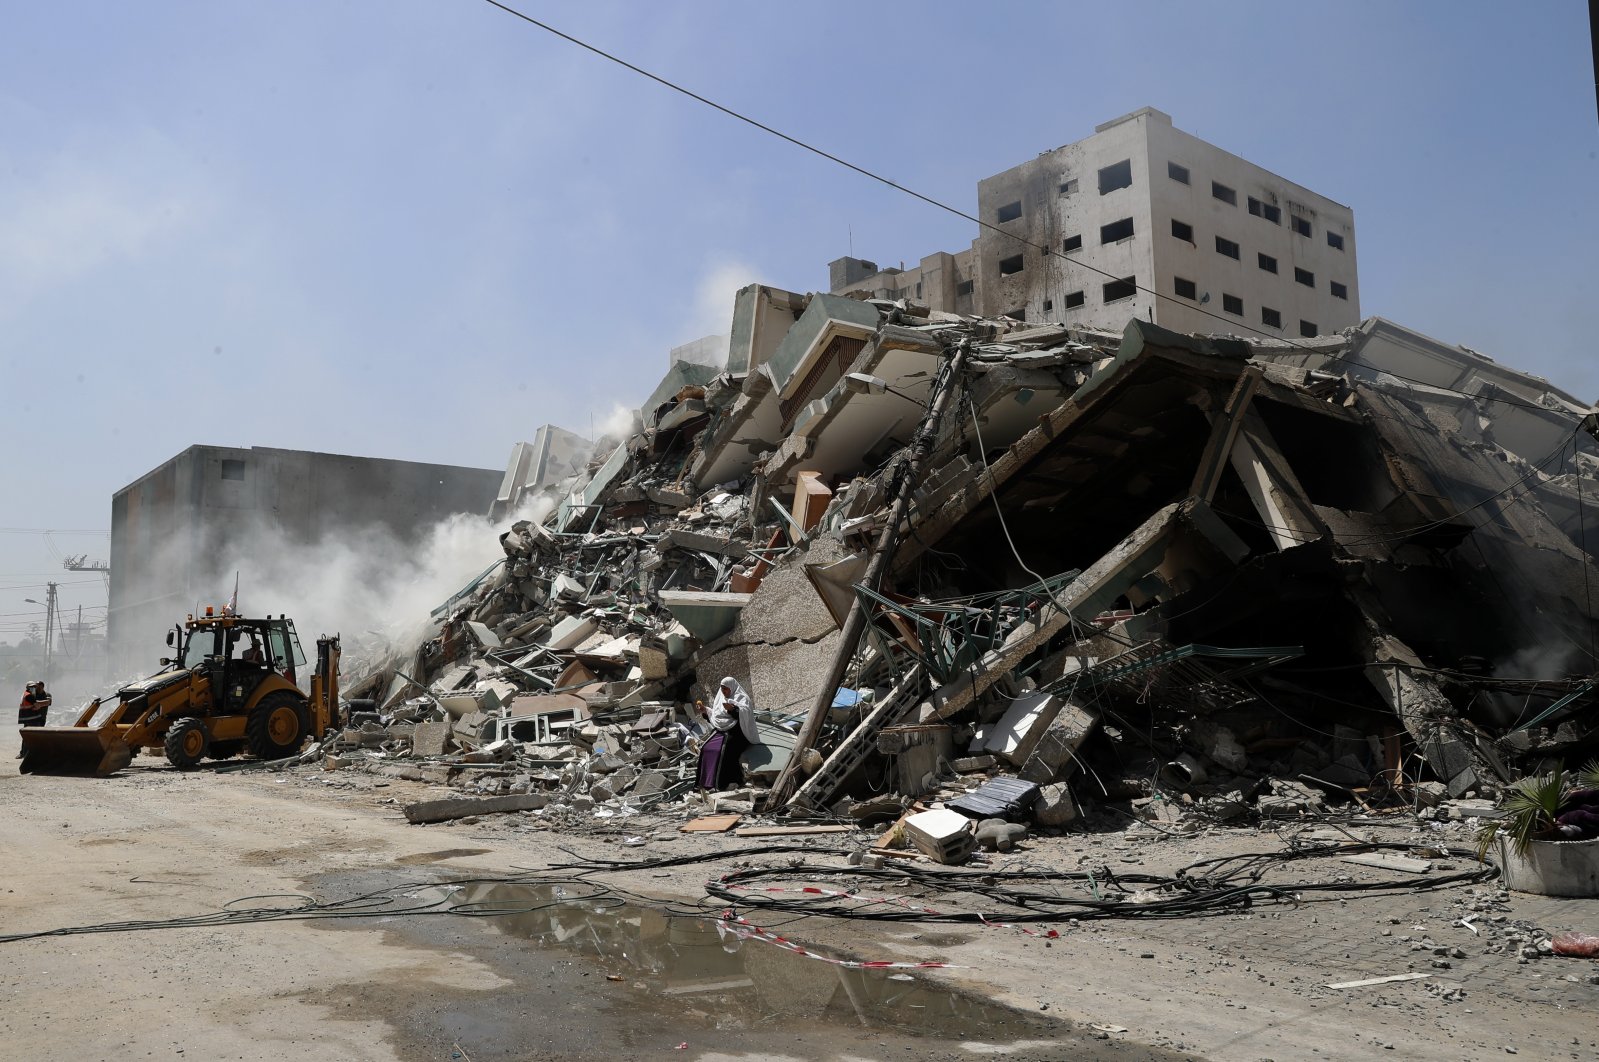 Workers clear the rubble of a building that was destroyed by an Israeli airstrike on Saturday, that housed The Associated Press, broadcaster Al-Jazeera and other media outlets, in Gaza City, May 16, 2021. (AP Photo/Adel Hana)